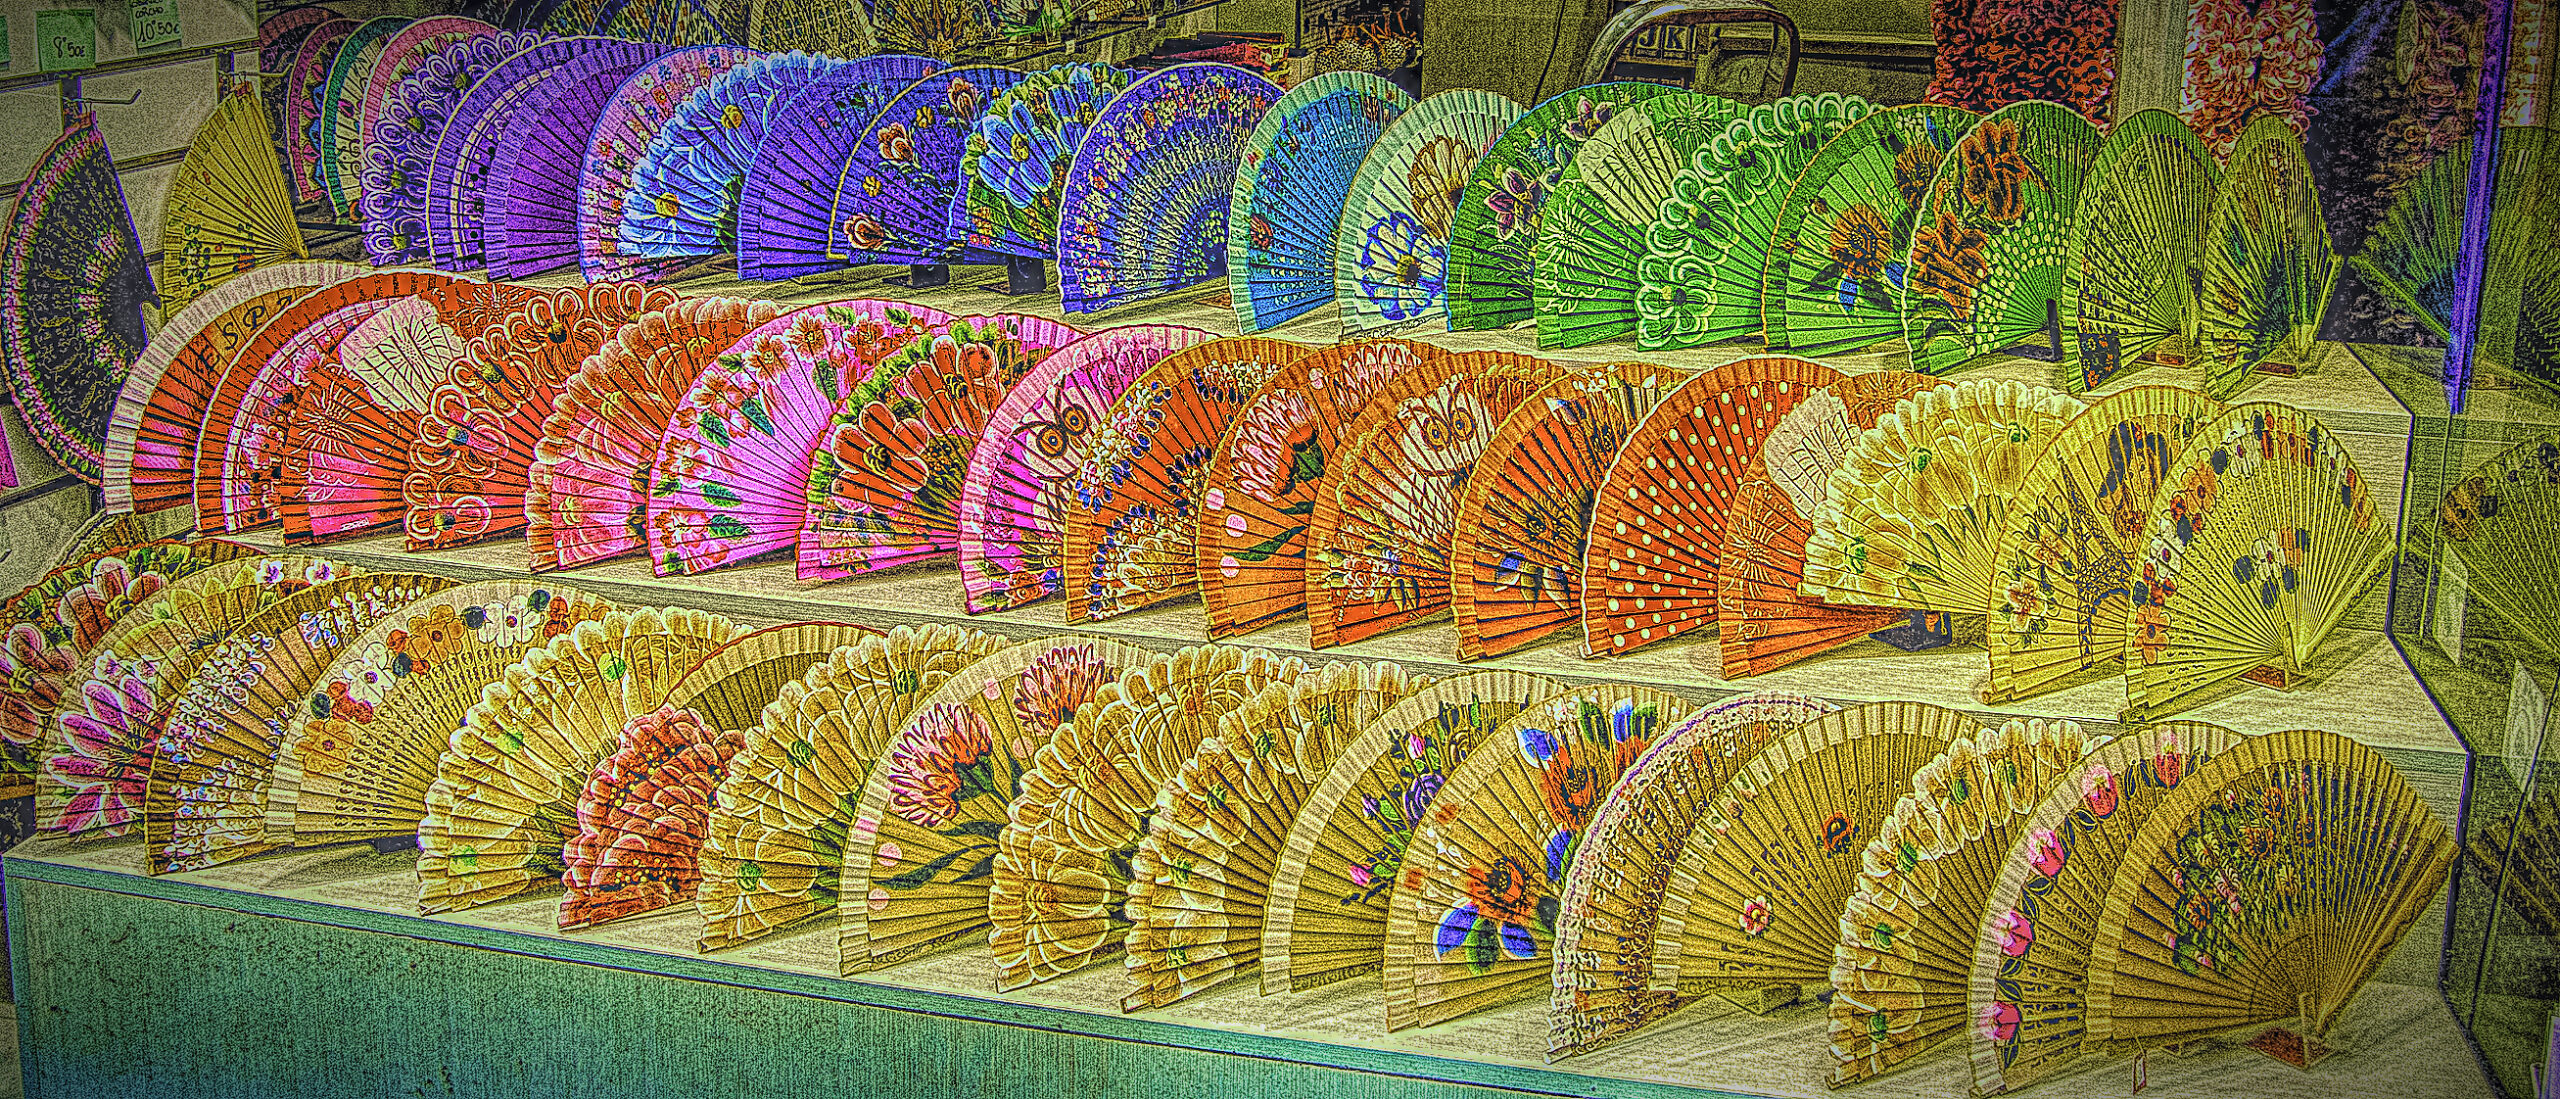 Colorful fans in the window of a store in Seville, Spain